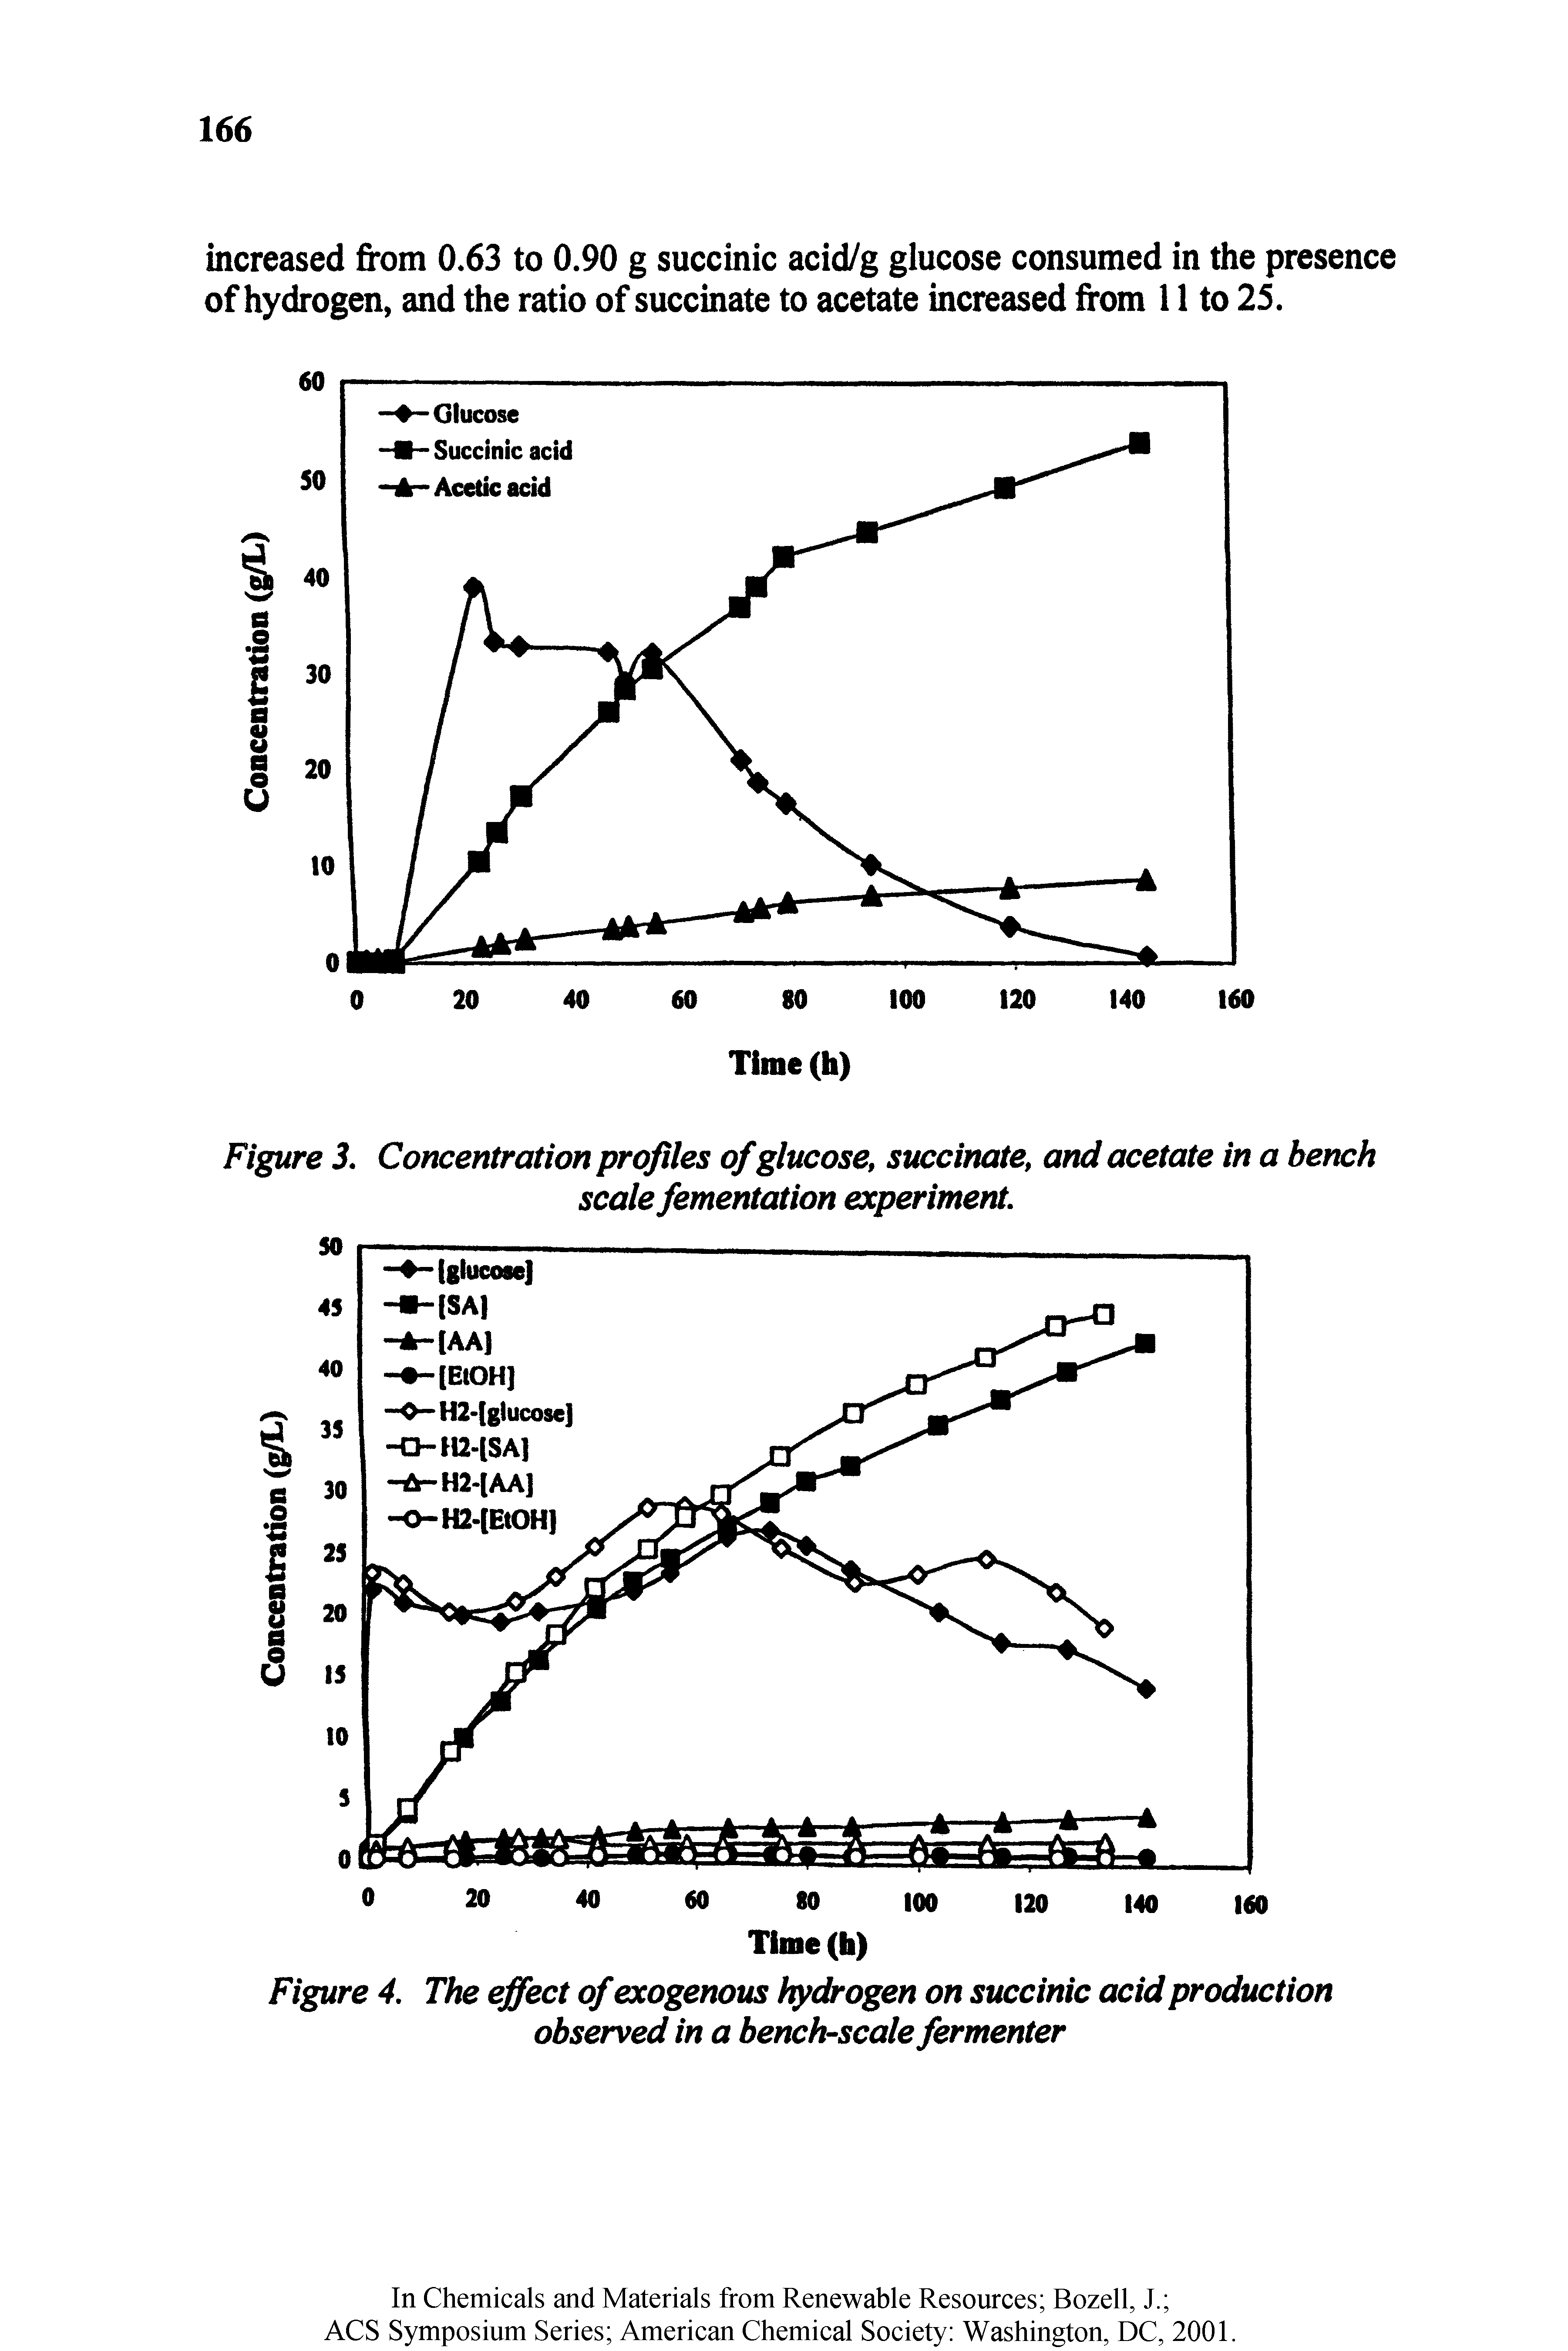 Figure 3. Concentration profiles of glucose, succinate, and acetate in a bench scale fementation experiment.